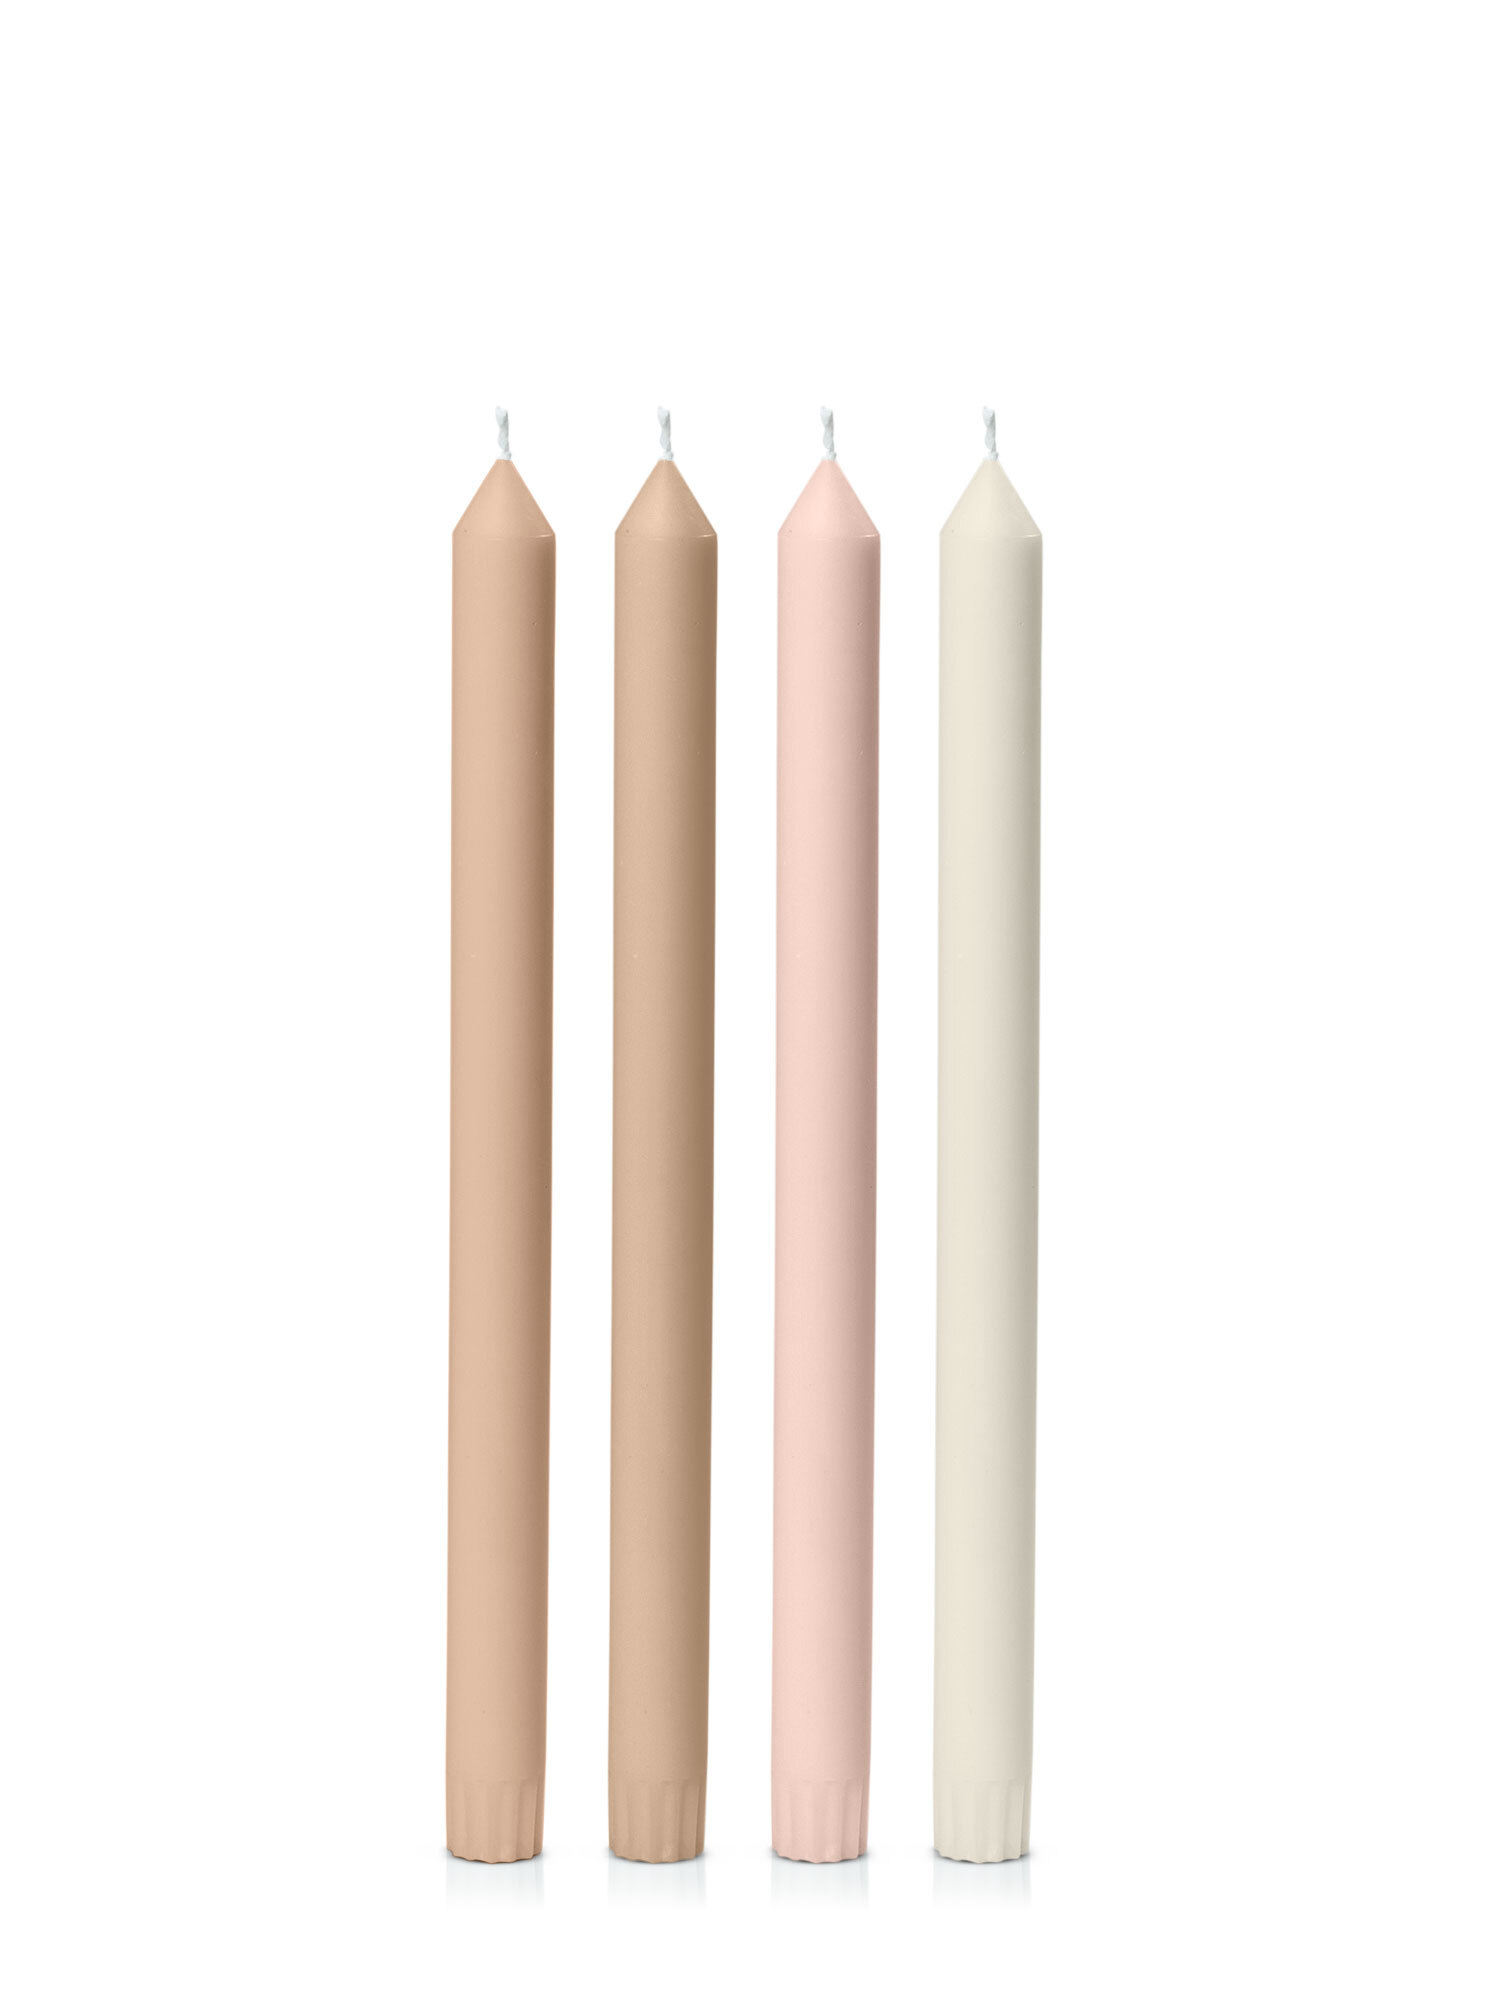 Totally Nude 30cm Dinner Candle, Pack of 4